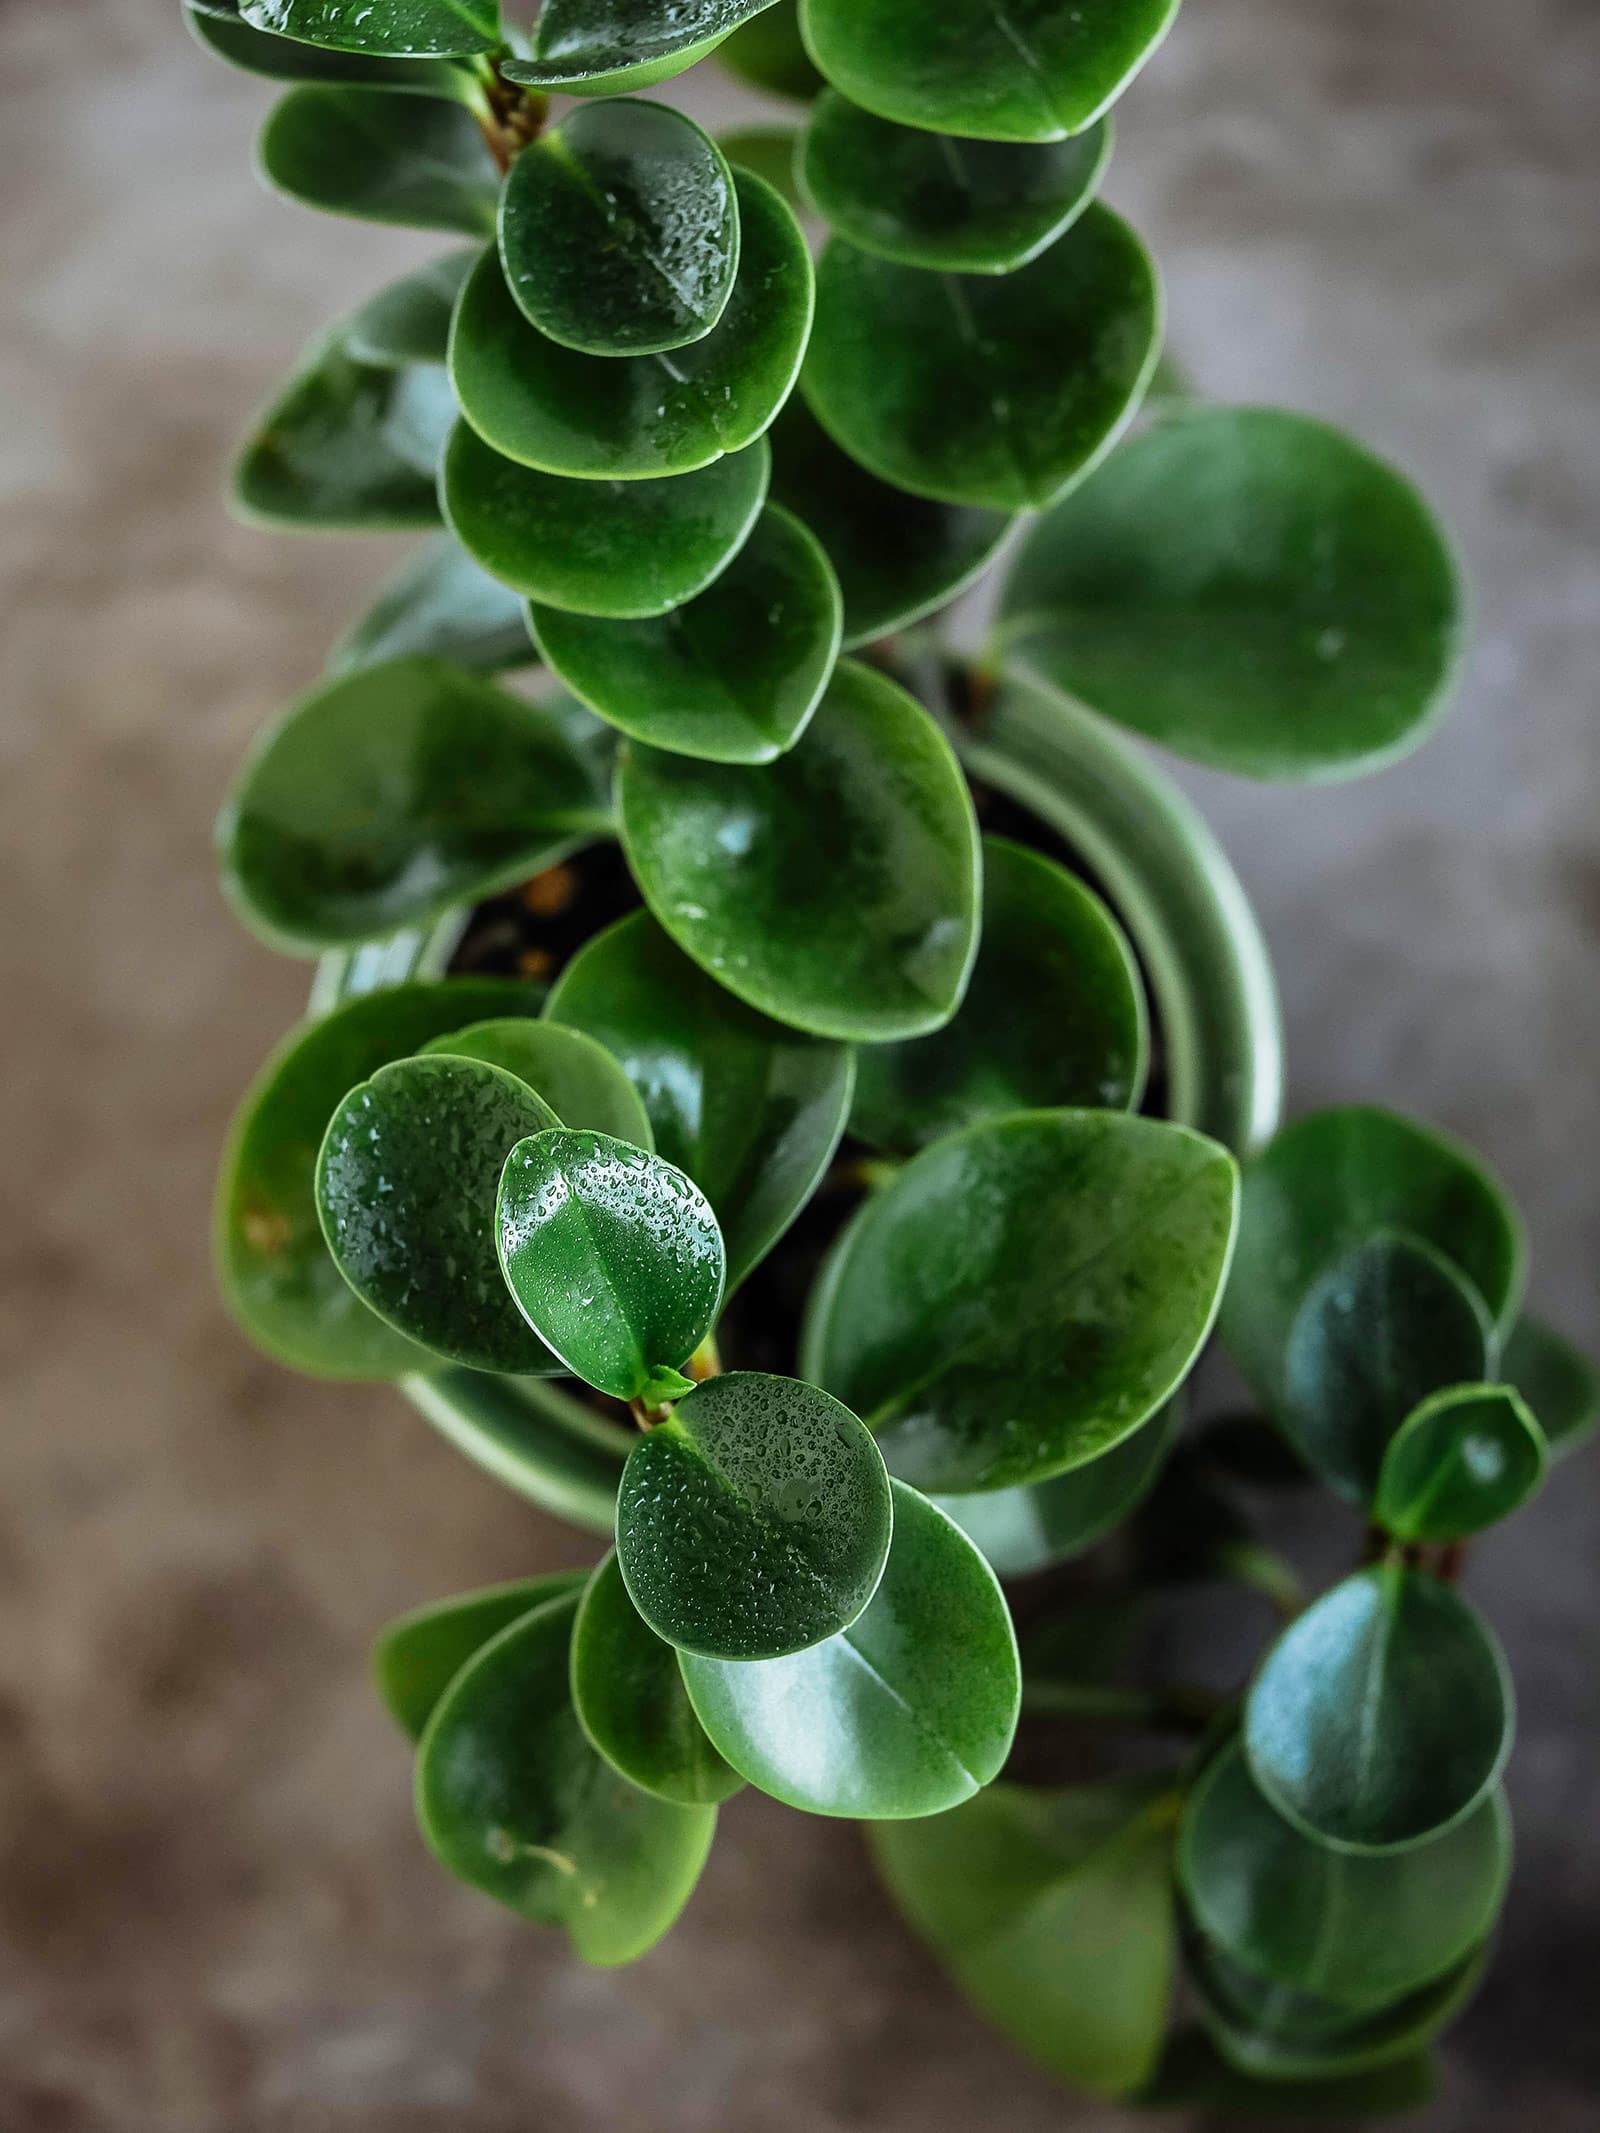 Peperomia obtusifolia houseplant with shiny dark green leaves speckled with water droplets